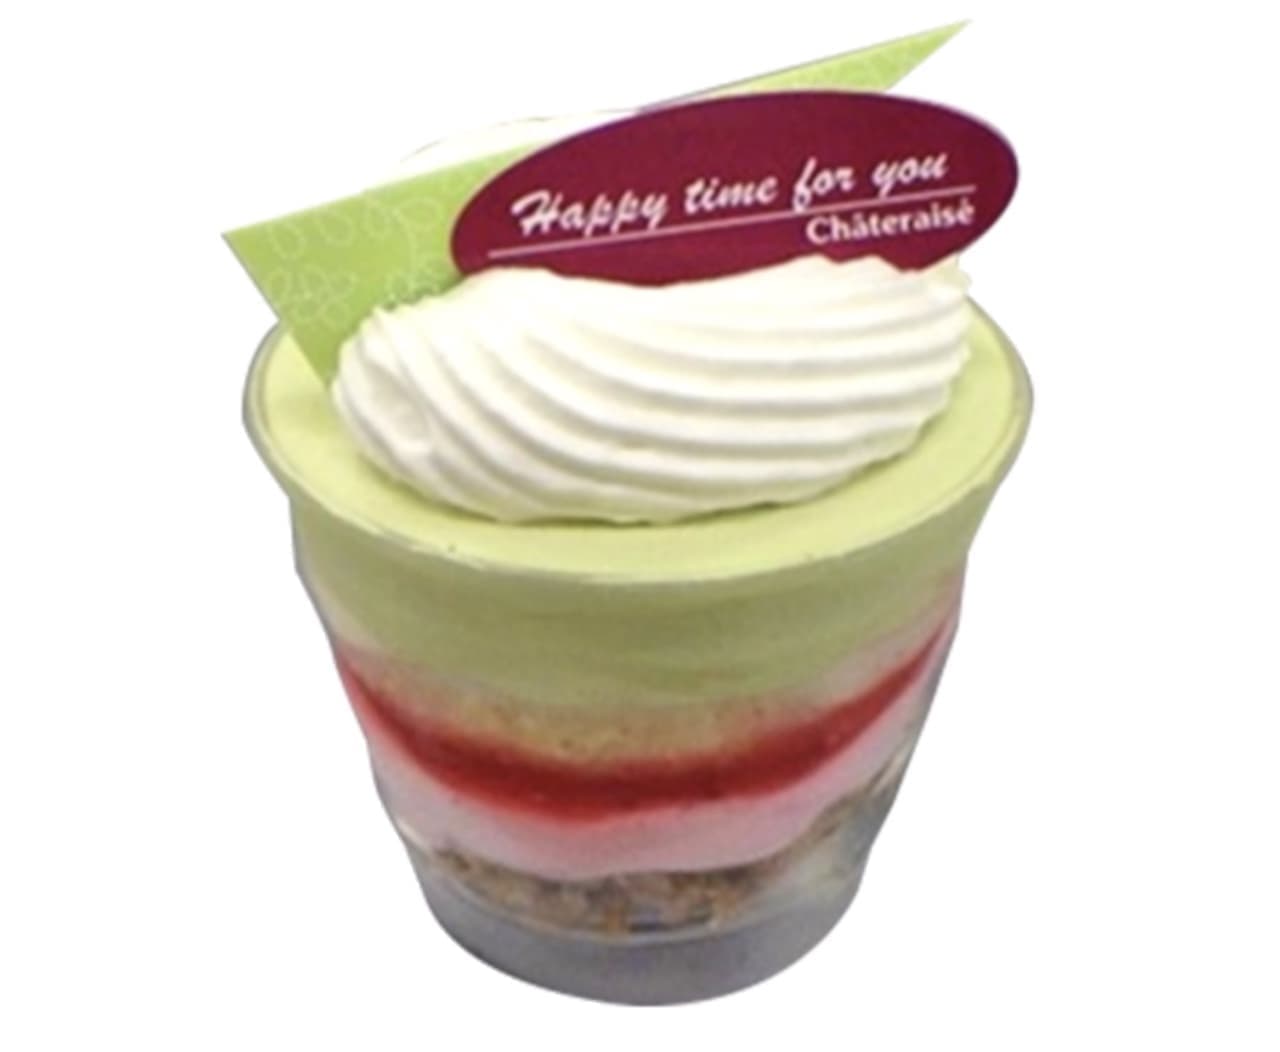 Chateraise "Berry and Pistachio Cups with Hokkaido Pure Fresh Cream